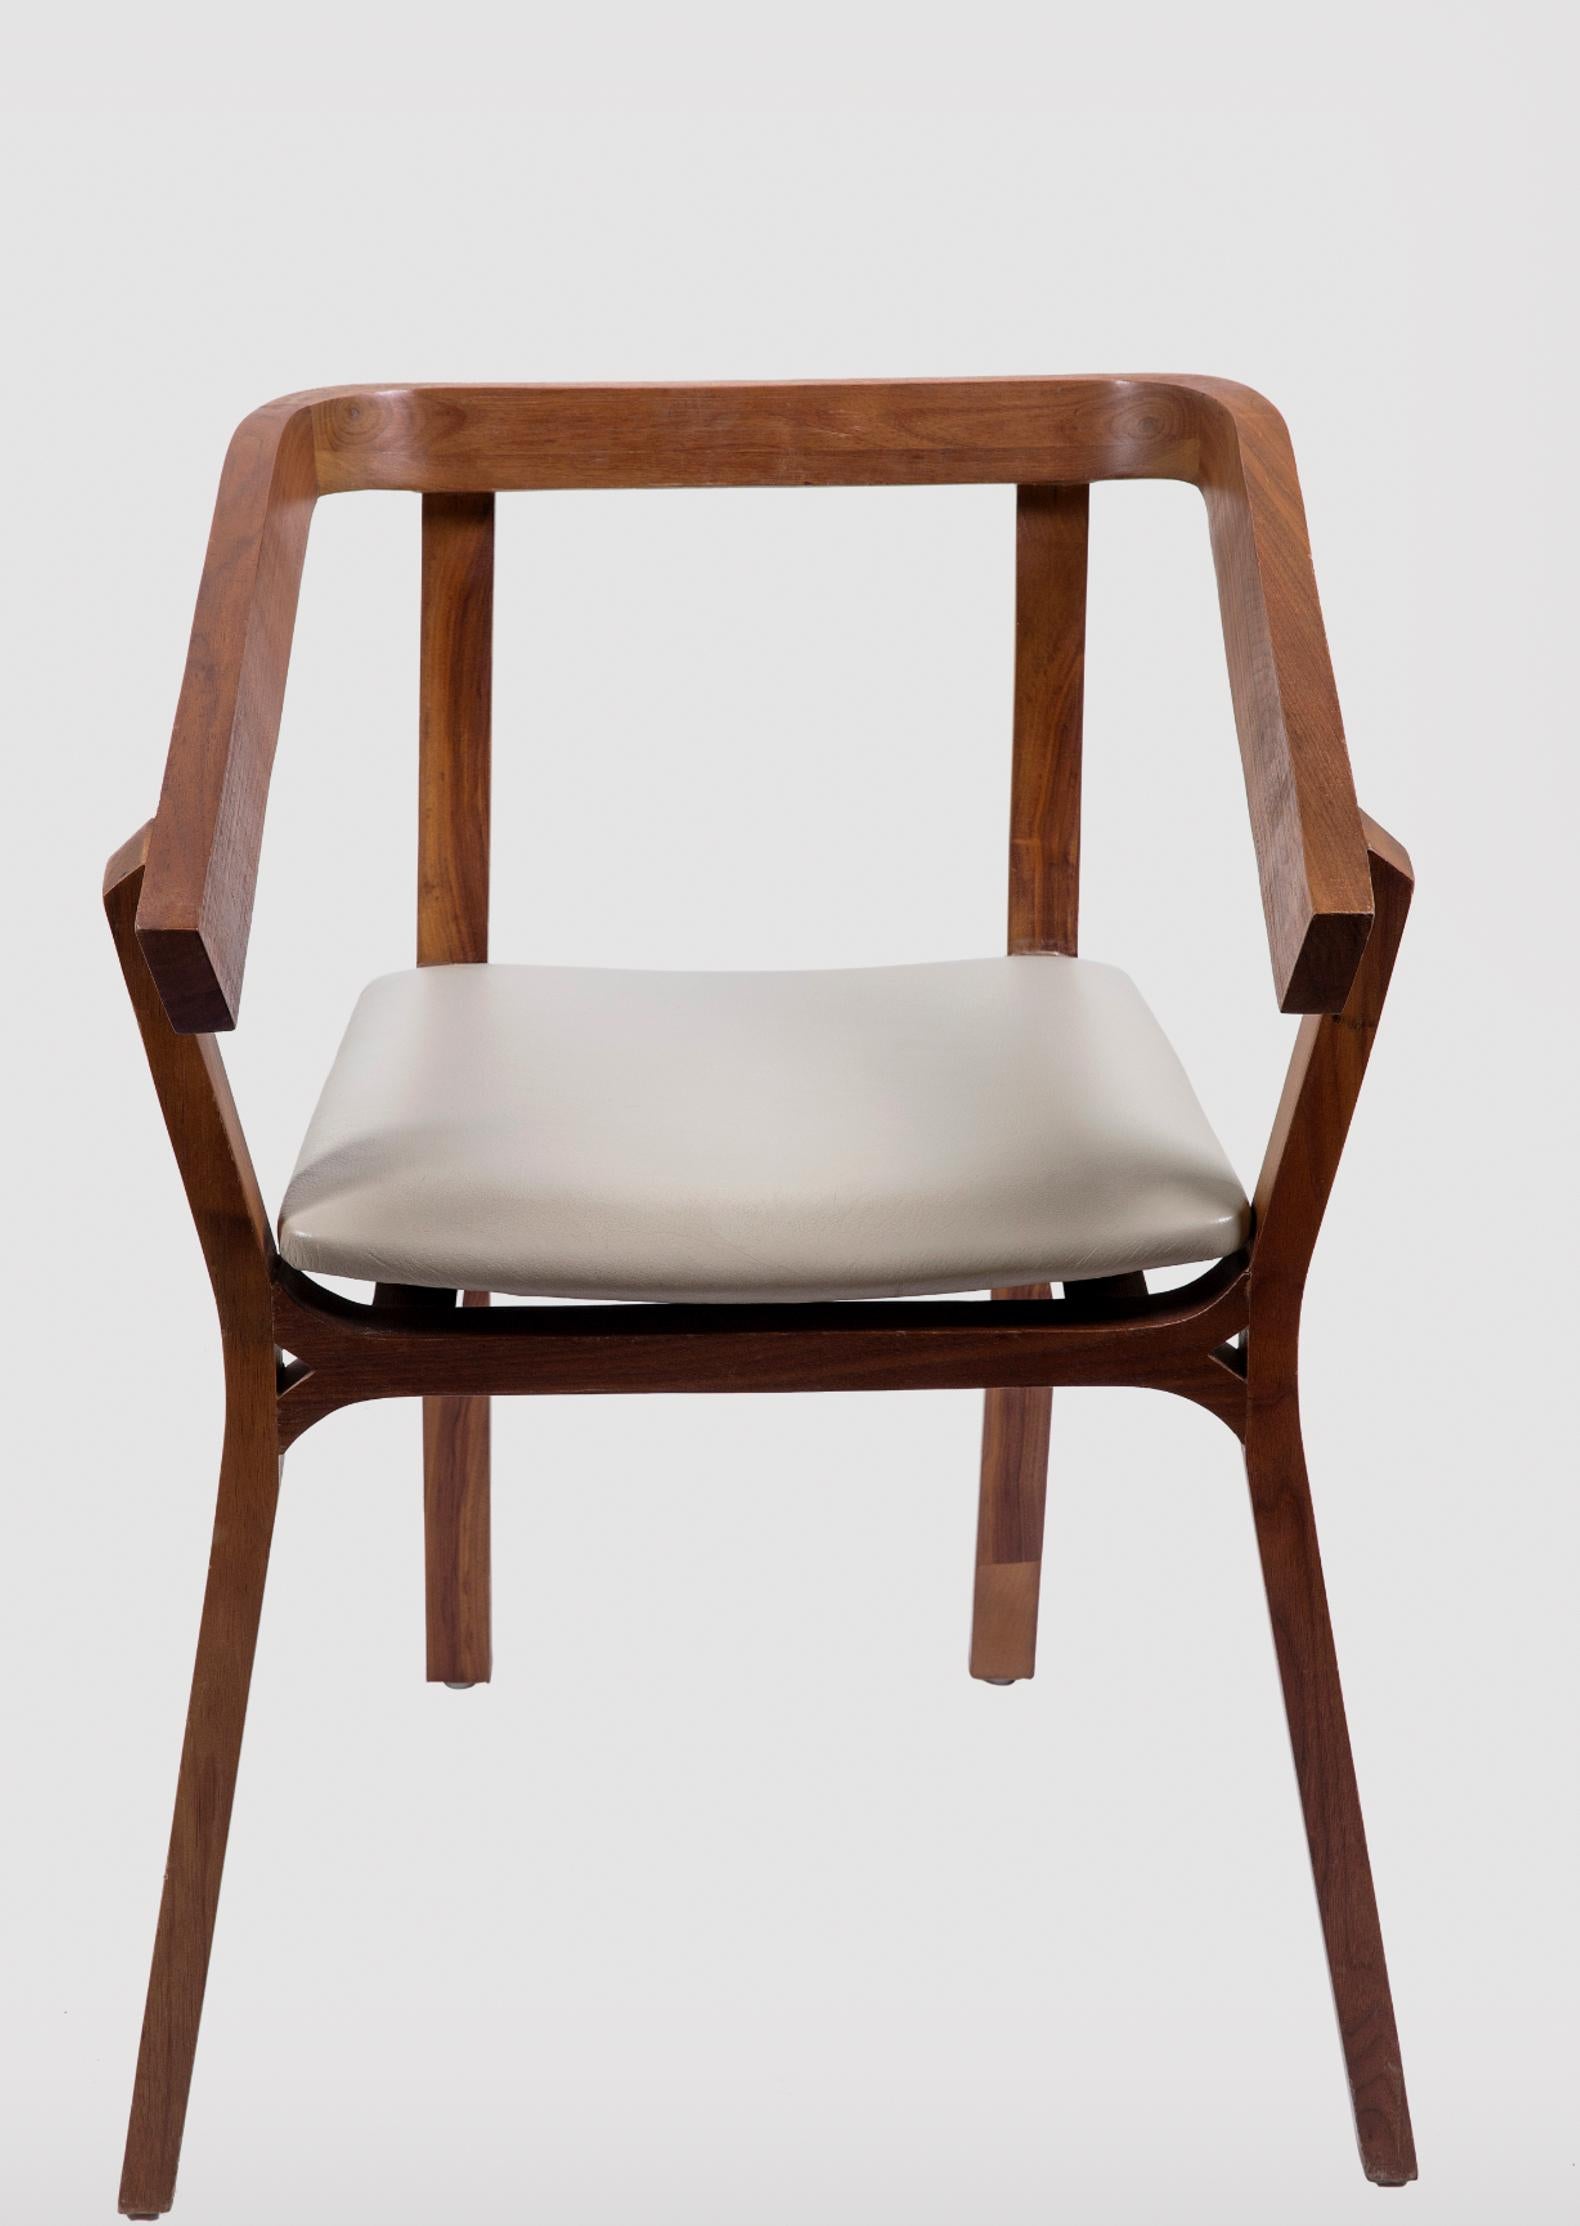 Modern Armchair in Walnut Hardwood by Obiect, Mexican Contemporary Design For Sale